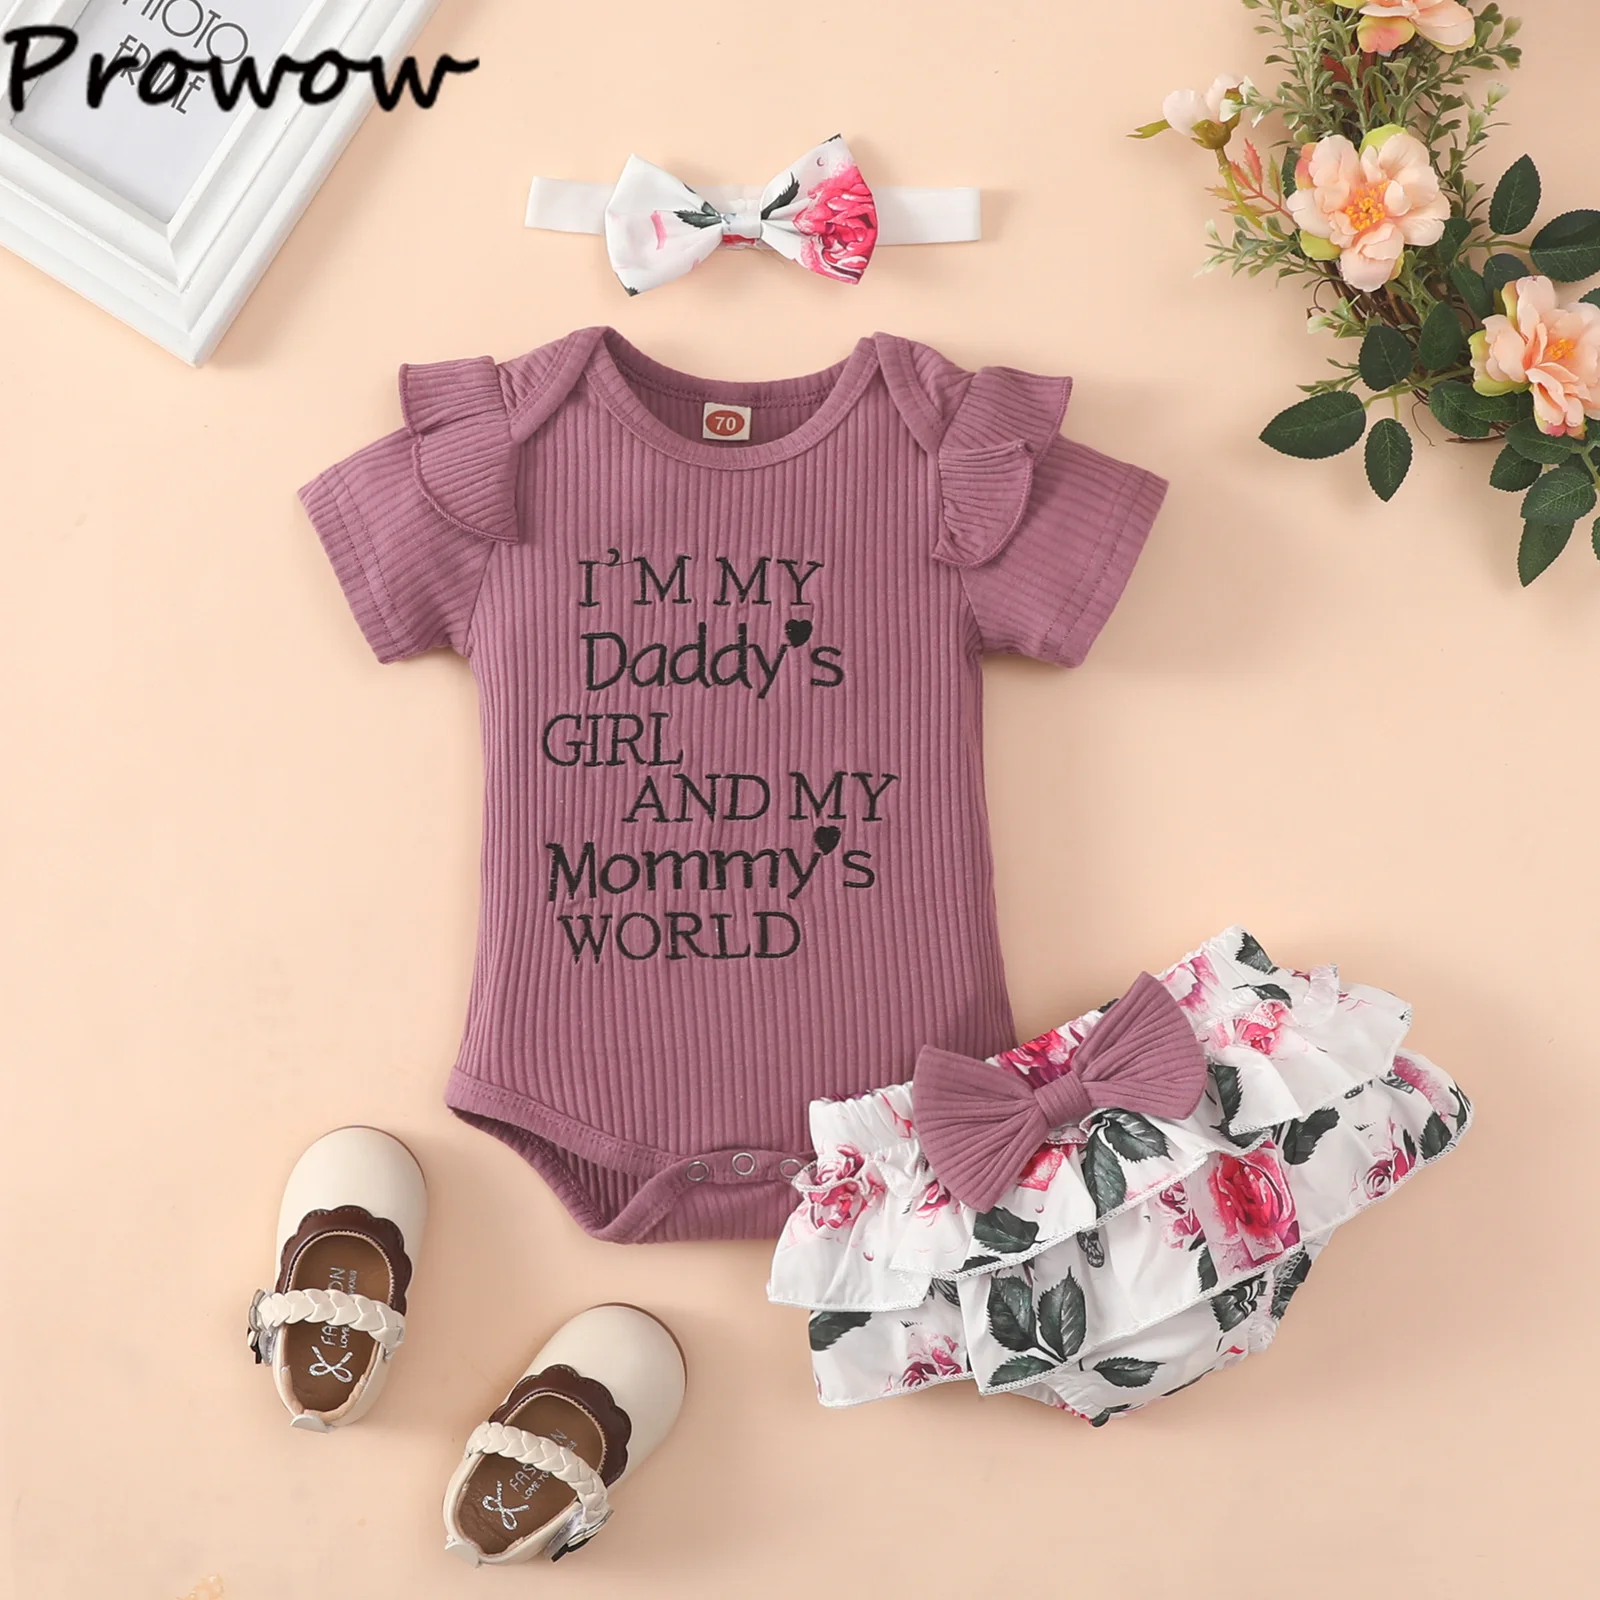 Baby Clothing Set near me Prowow 0-18M 3pcs Newborns Baby Girl Clothes Summer Red Heart Print Bodysuit Romper Floral Shorts Toddler Girl Clothing Outfits baby clothes in sets	